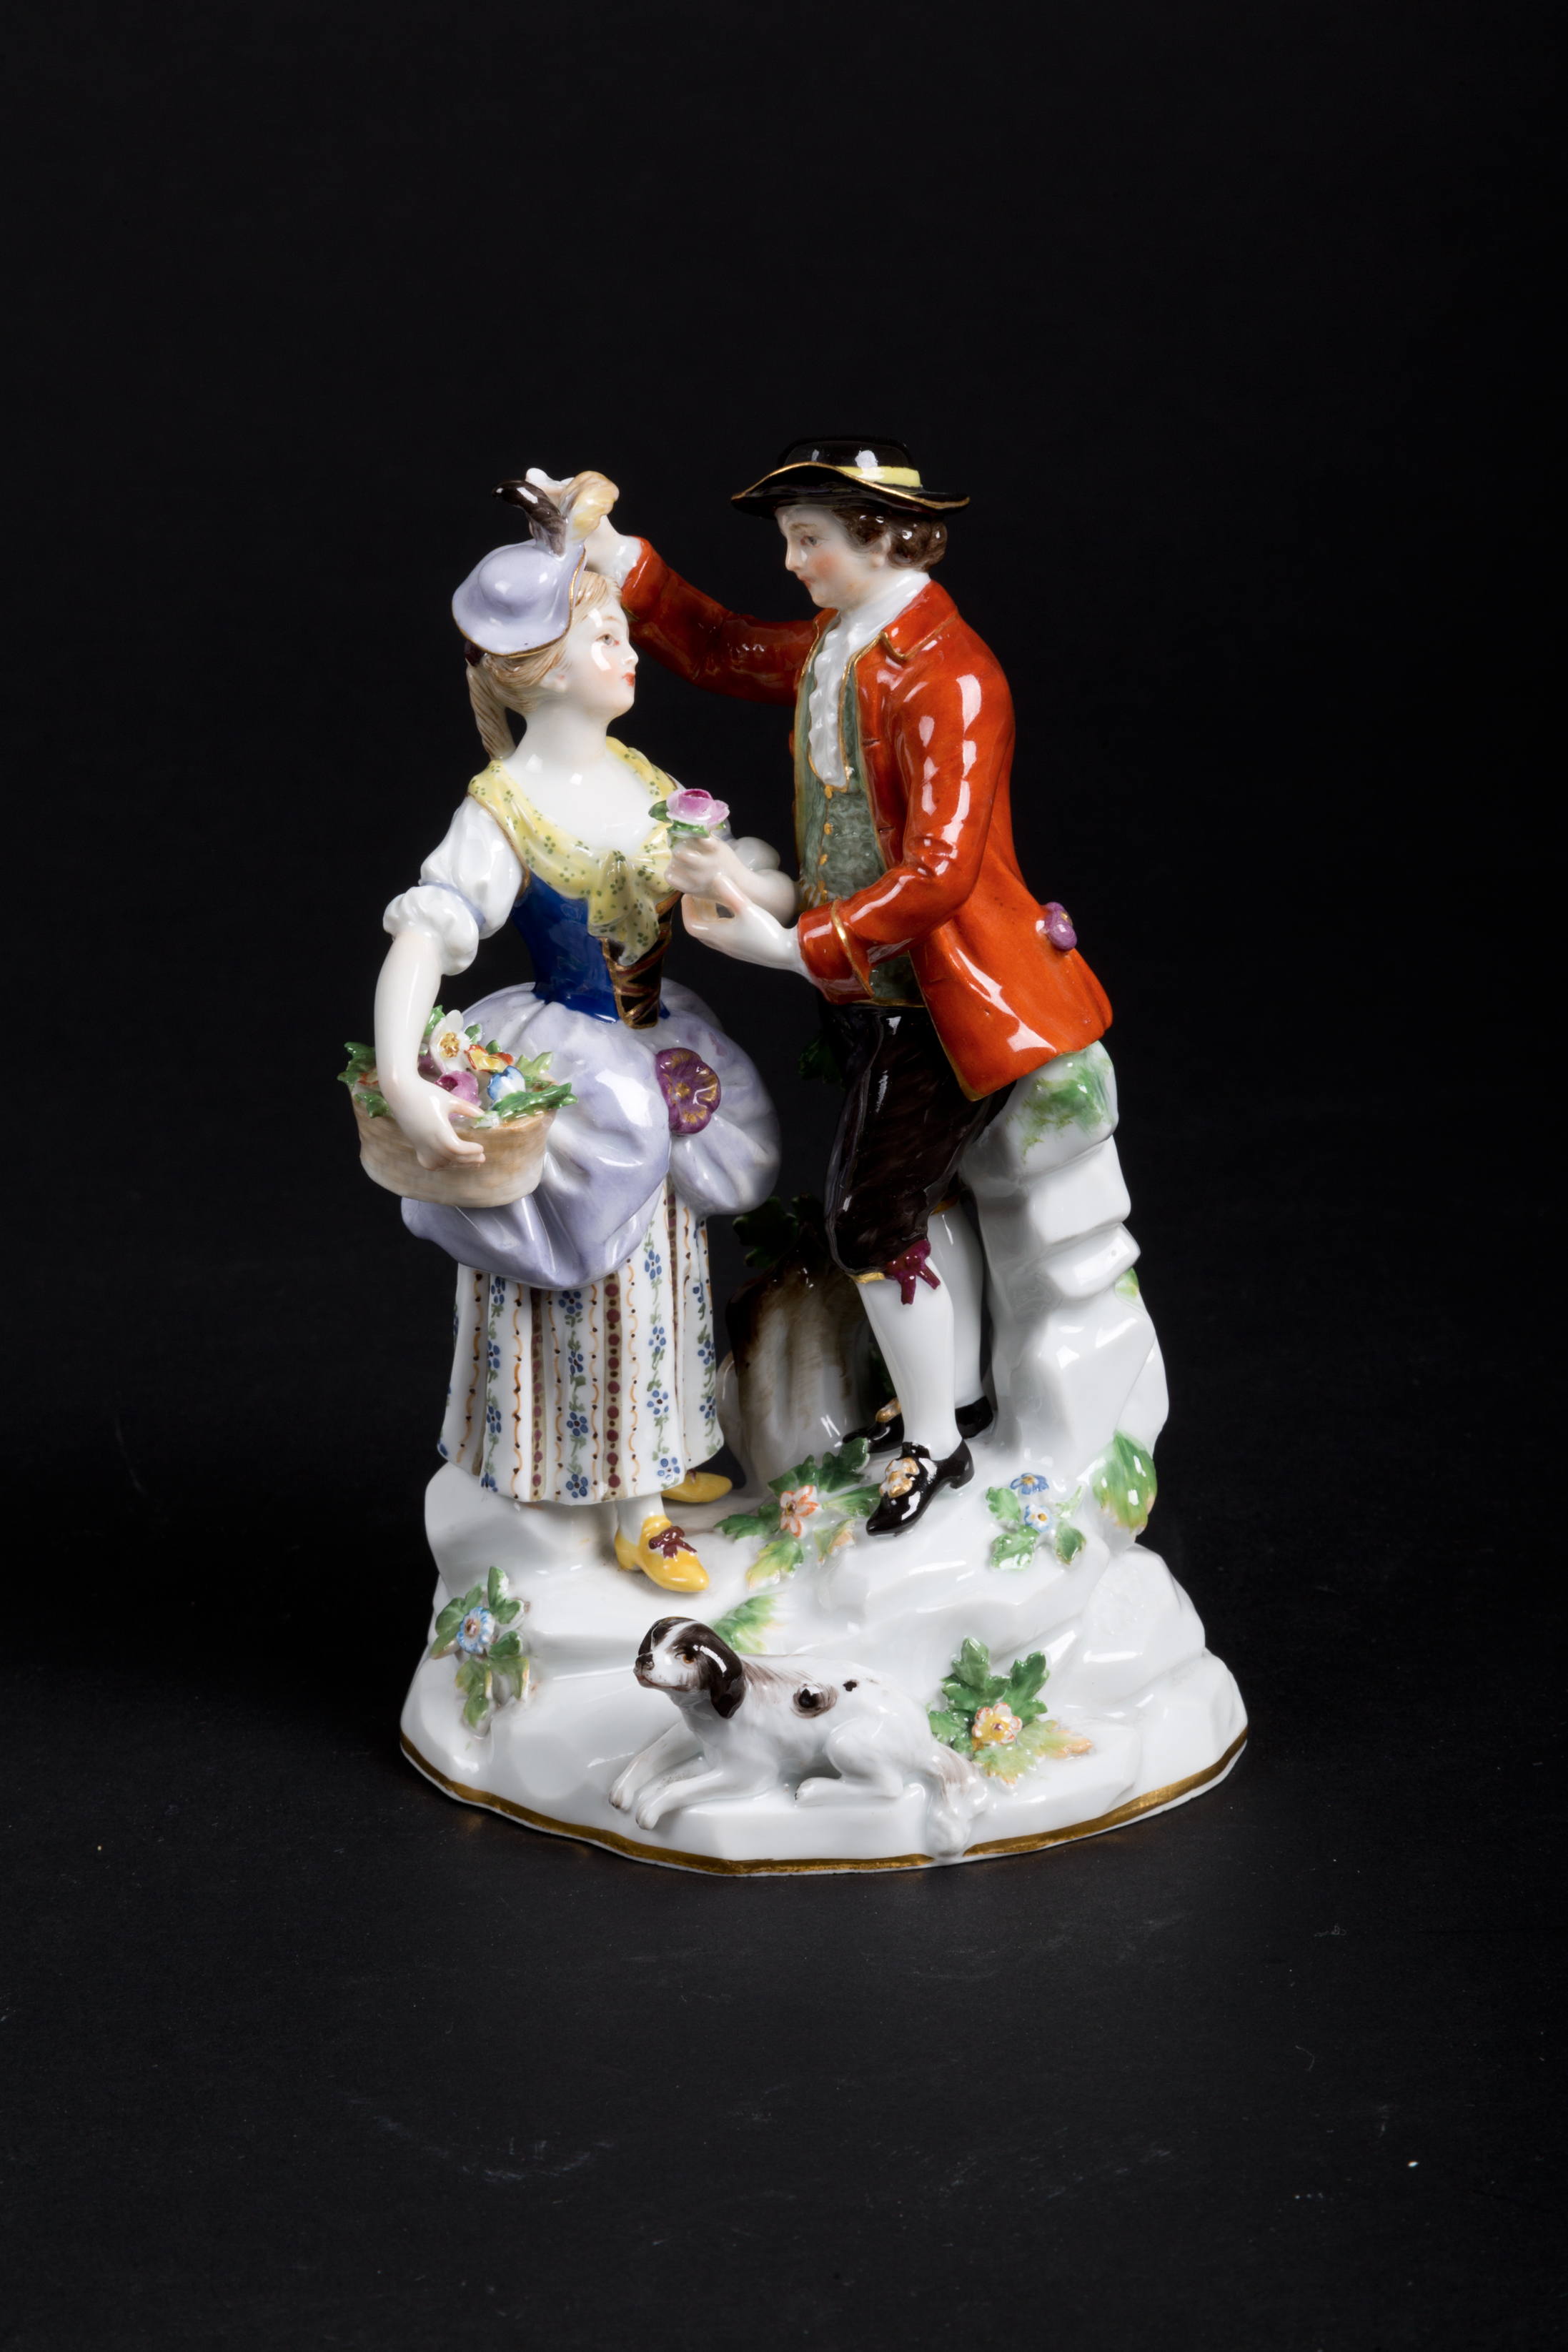 Meissen porcelain figurine. Late 18th-early 19th ce.